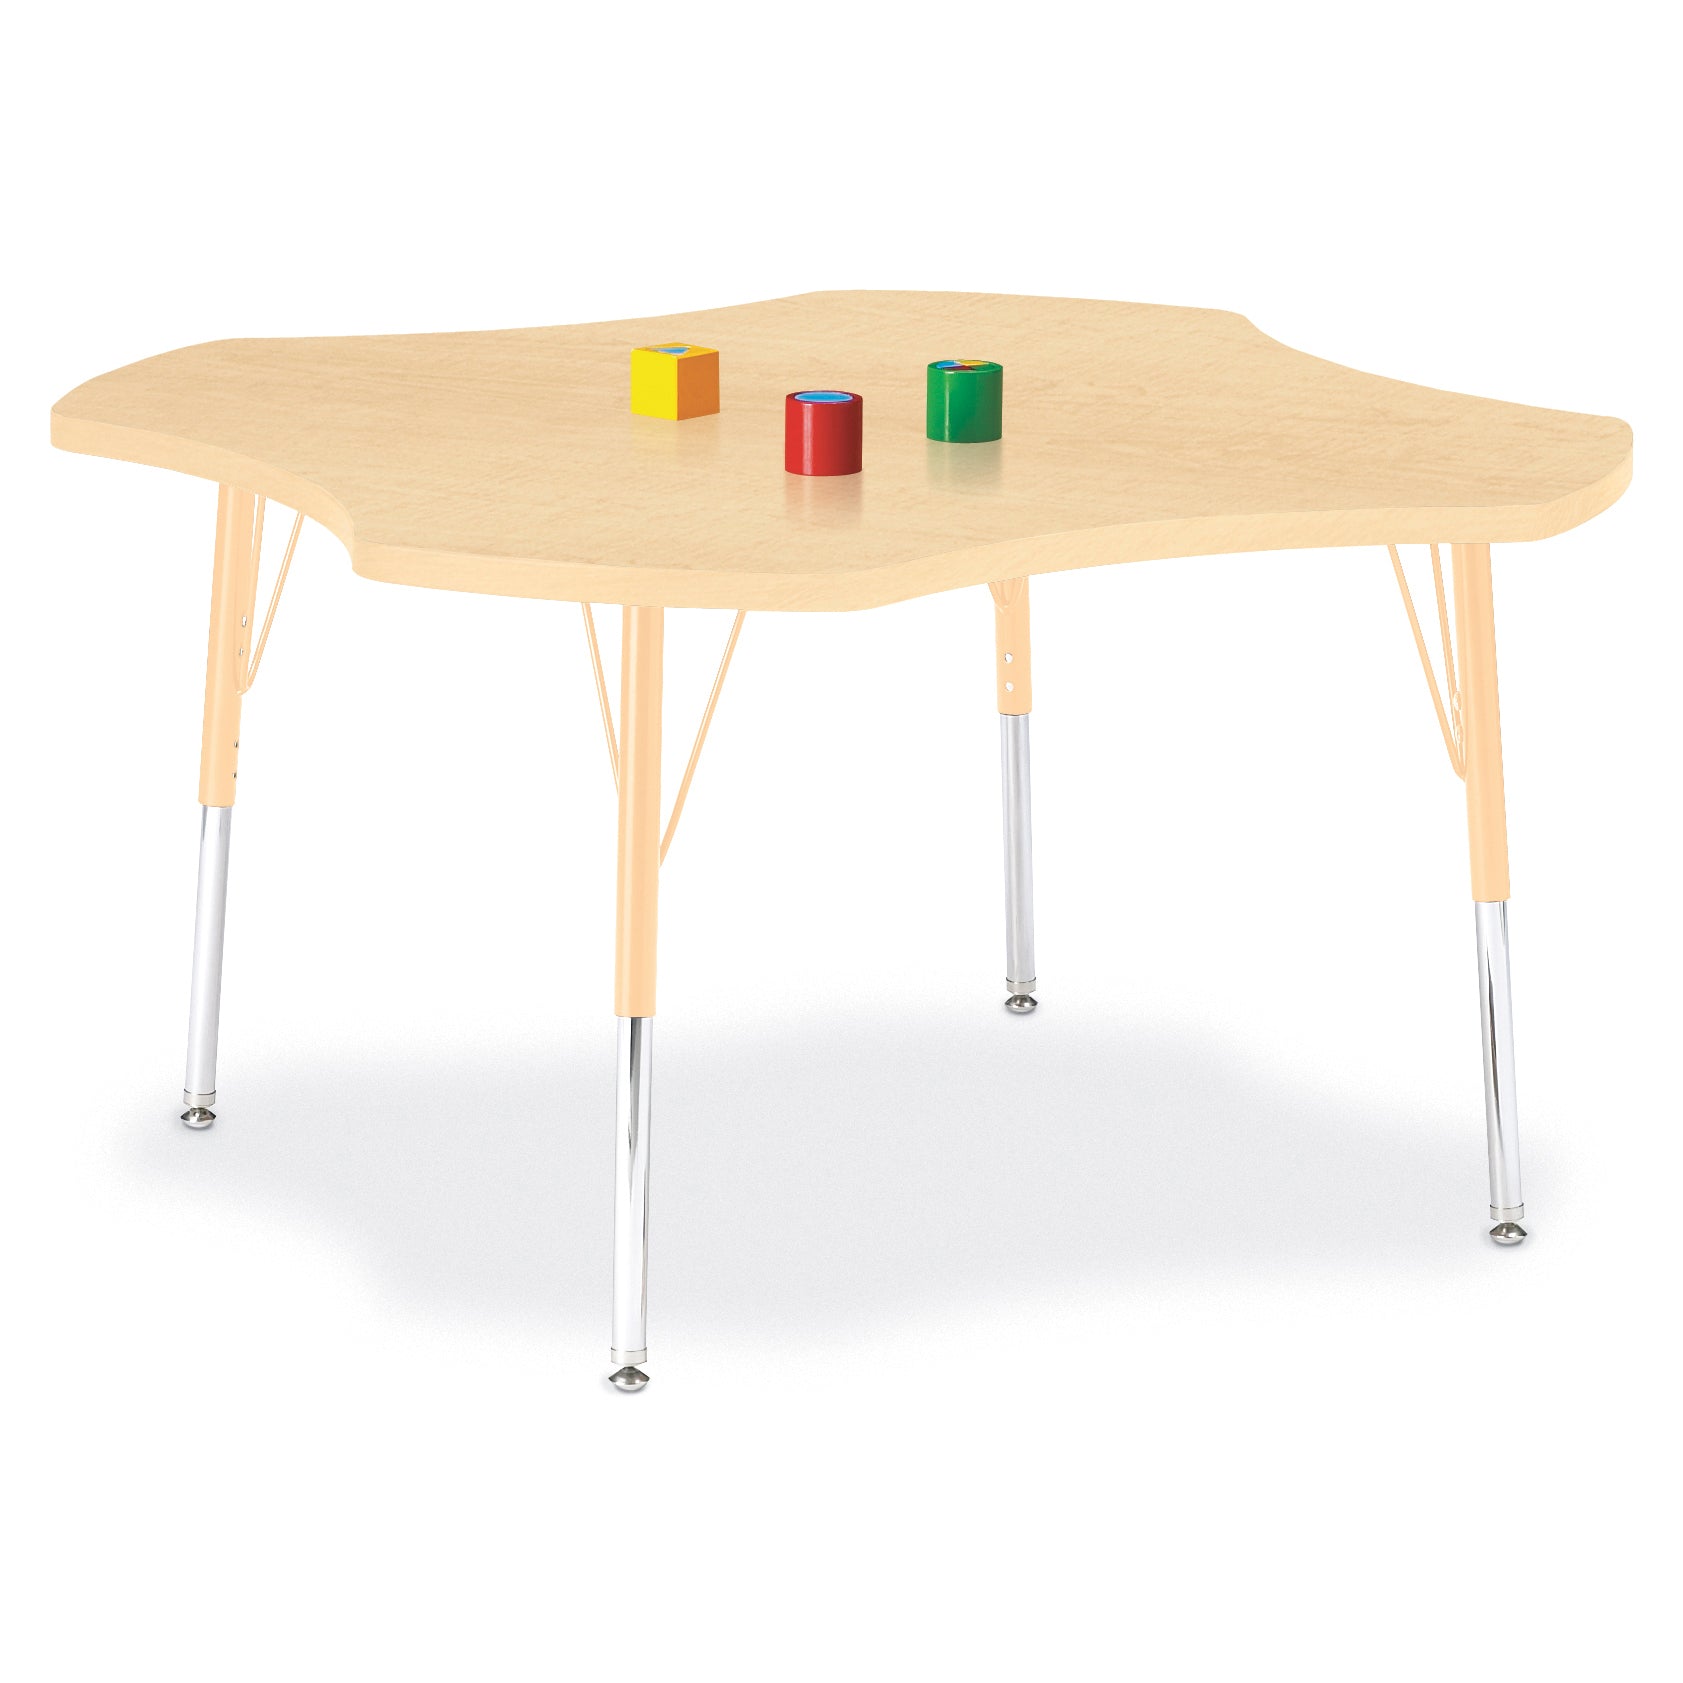 6453JCA251, Berries Four Leaf Activity Table, A-height - Maple/Maple/Camel